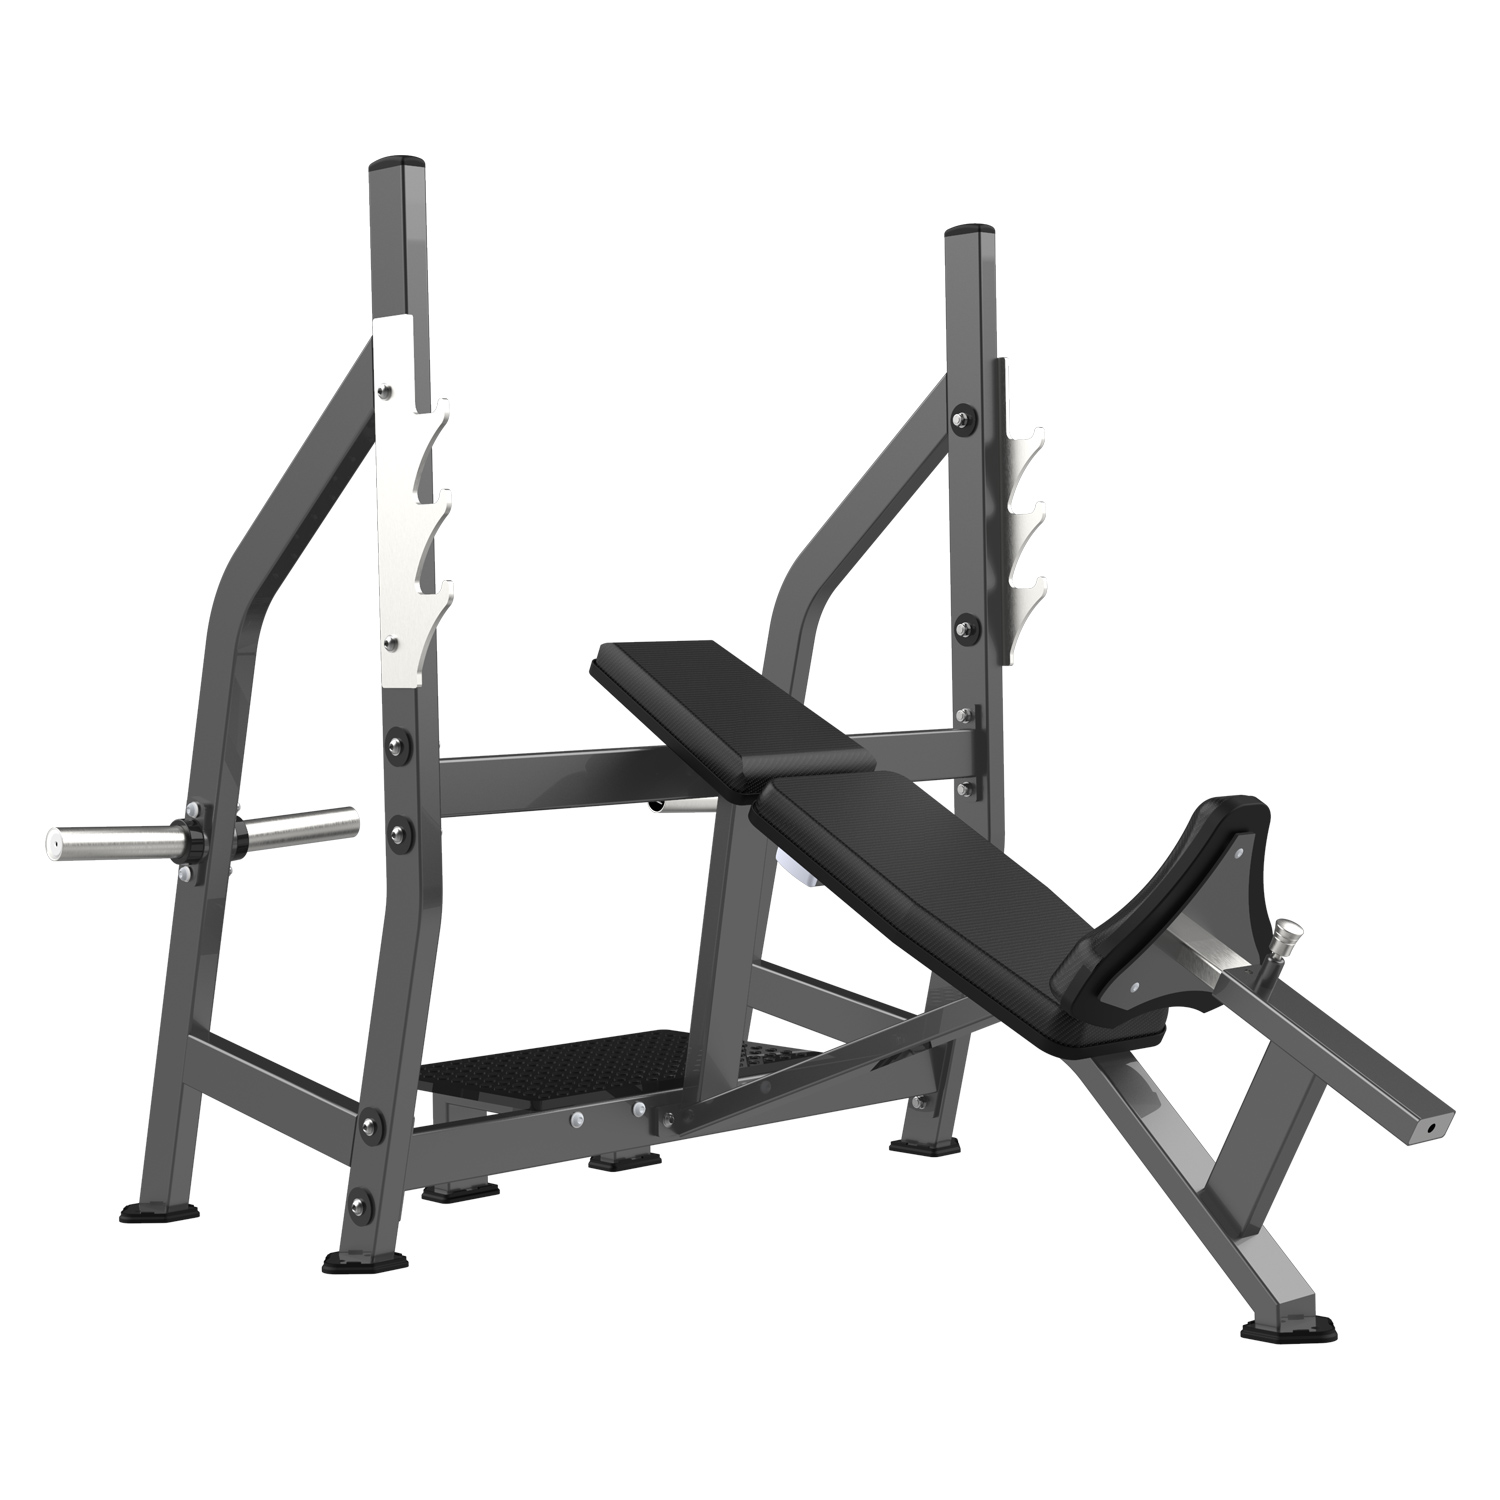 Multi Gym Exercises FW-2002 Olympic Incline Bench